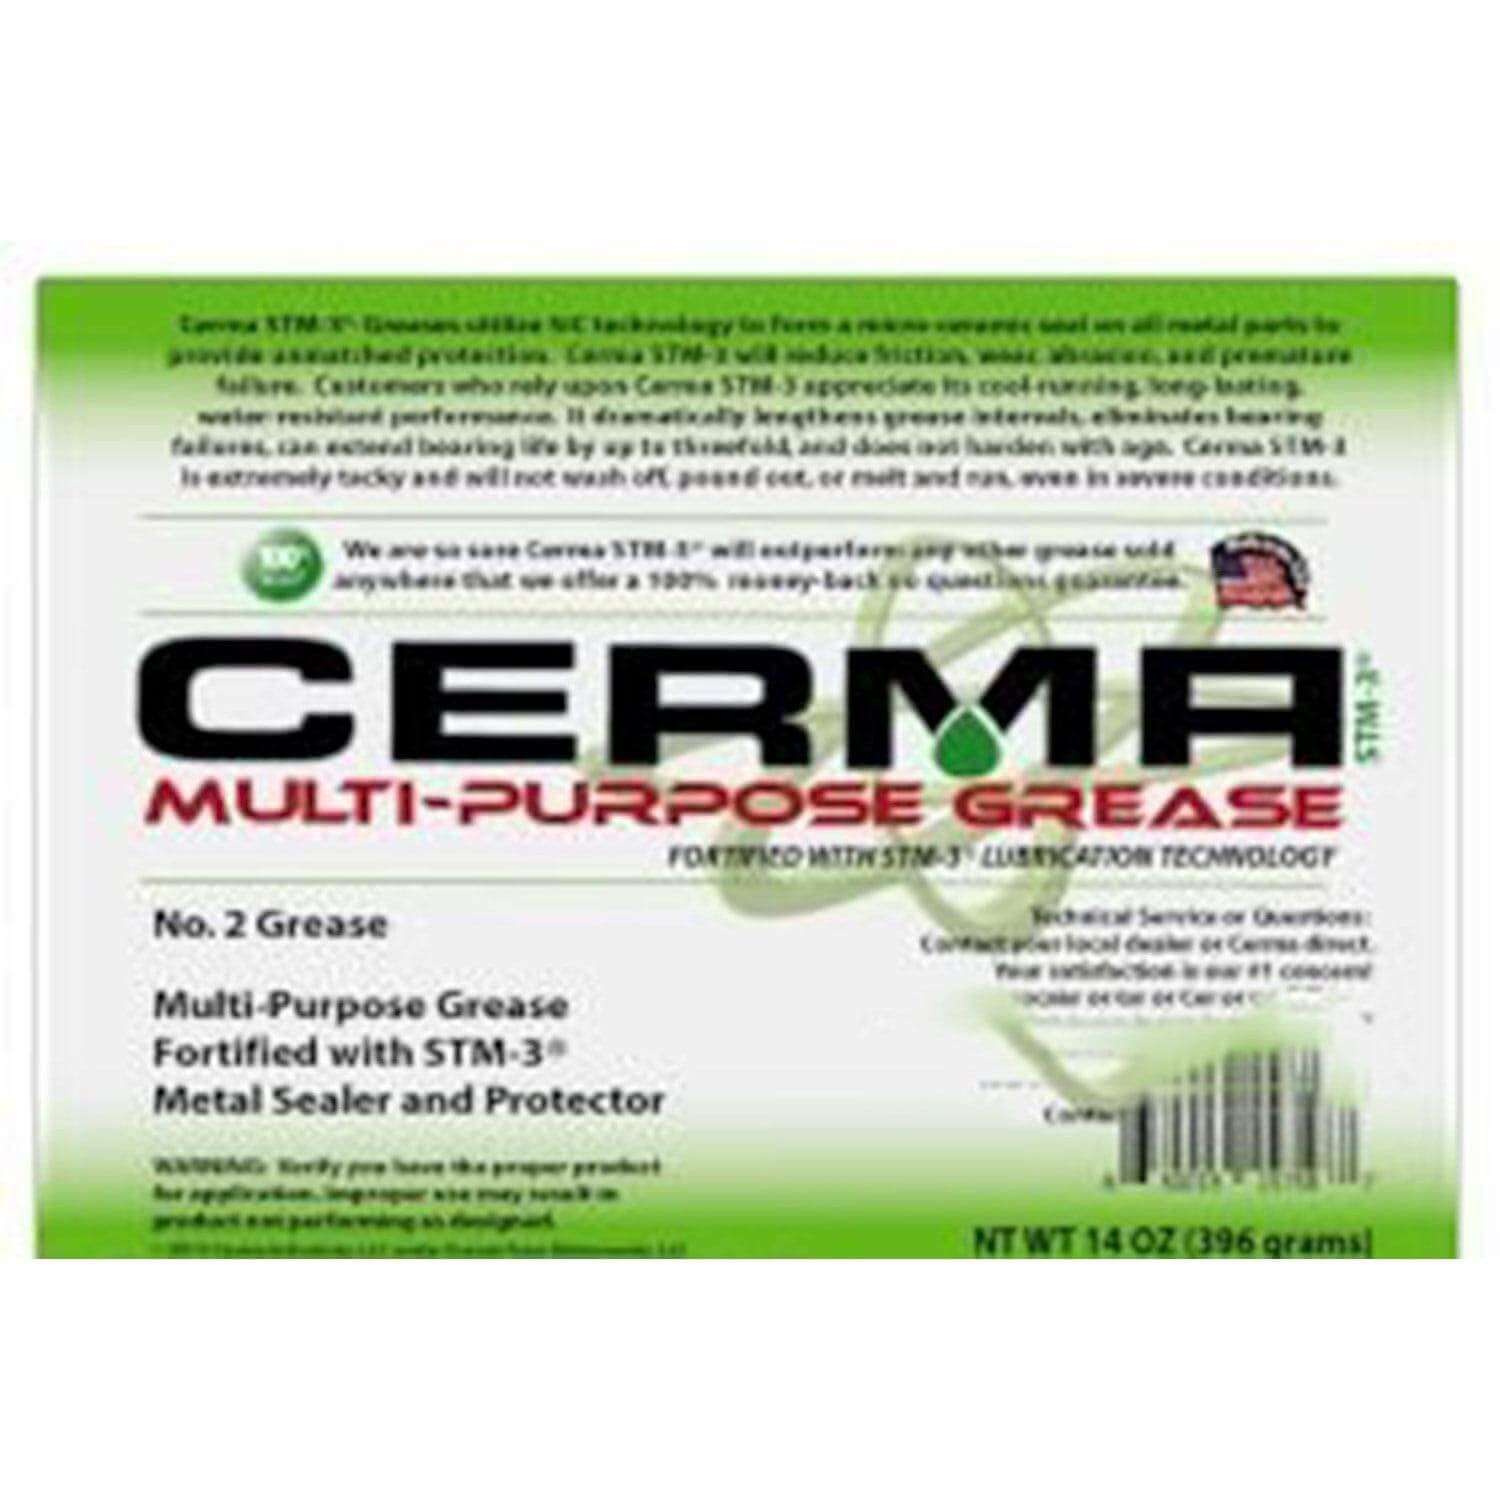 Cerma Ceramic Multi Purpose Grease at $110.4 only from cermatreatment.com